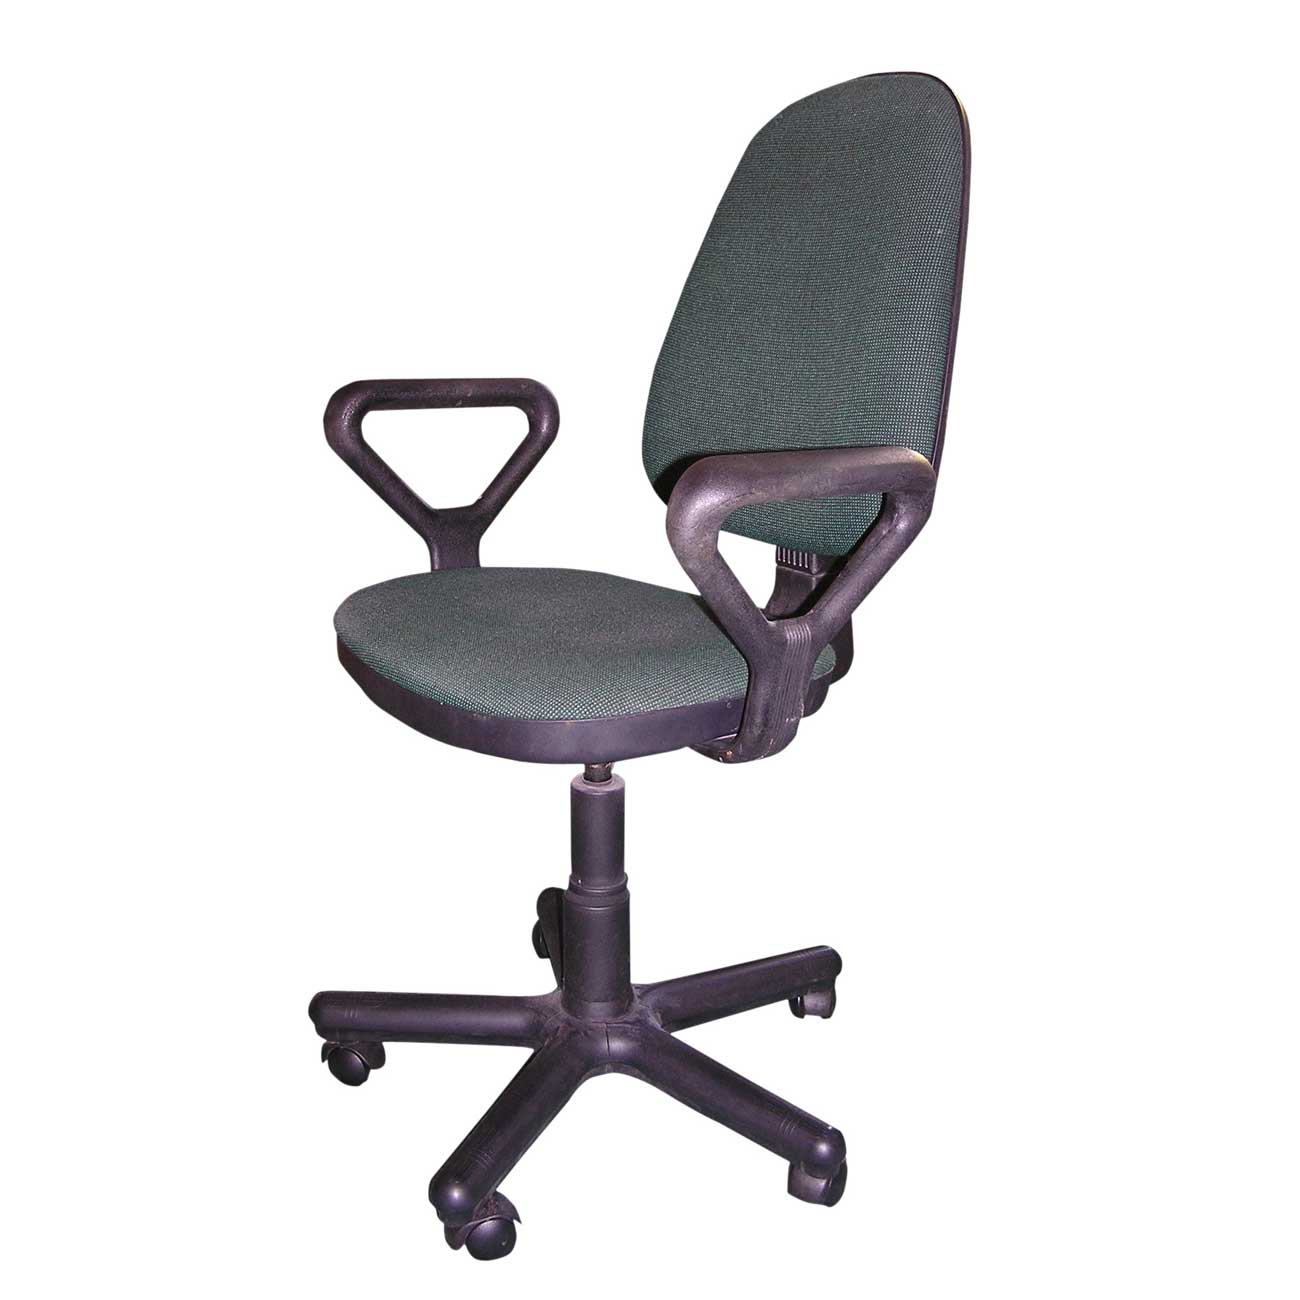 small computer chair